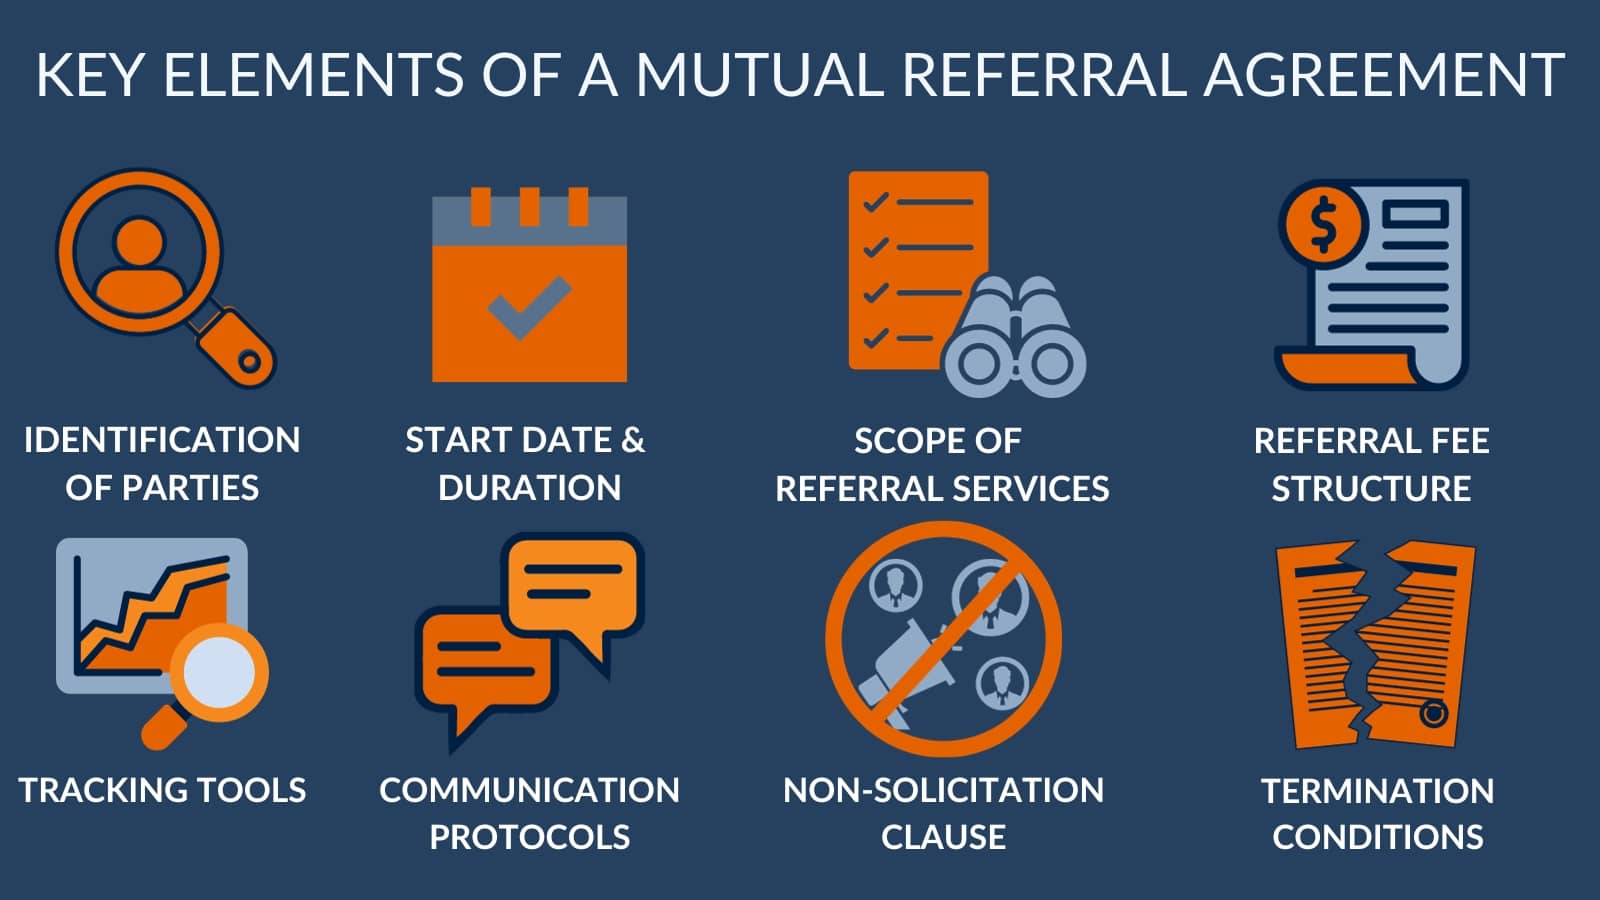 Key Elements of a Mutual Referral Agreement